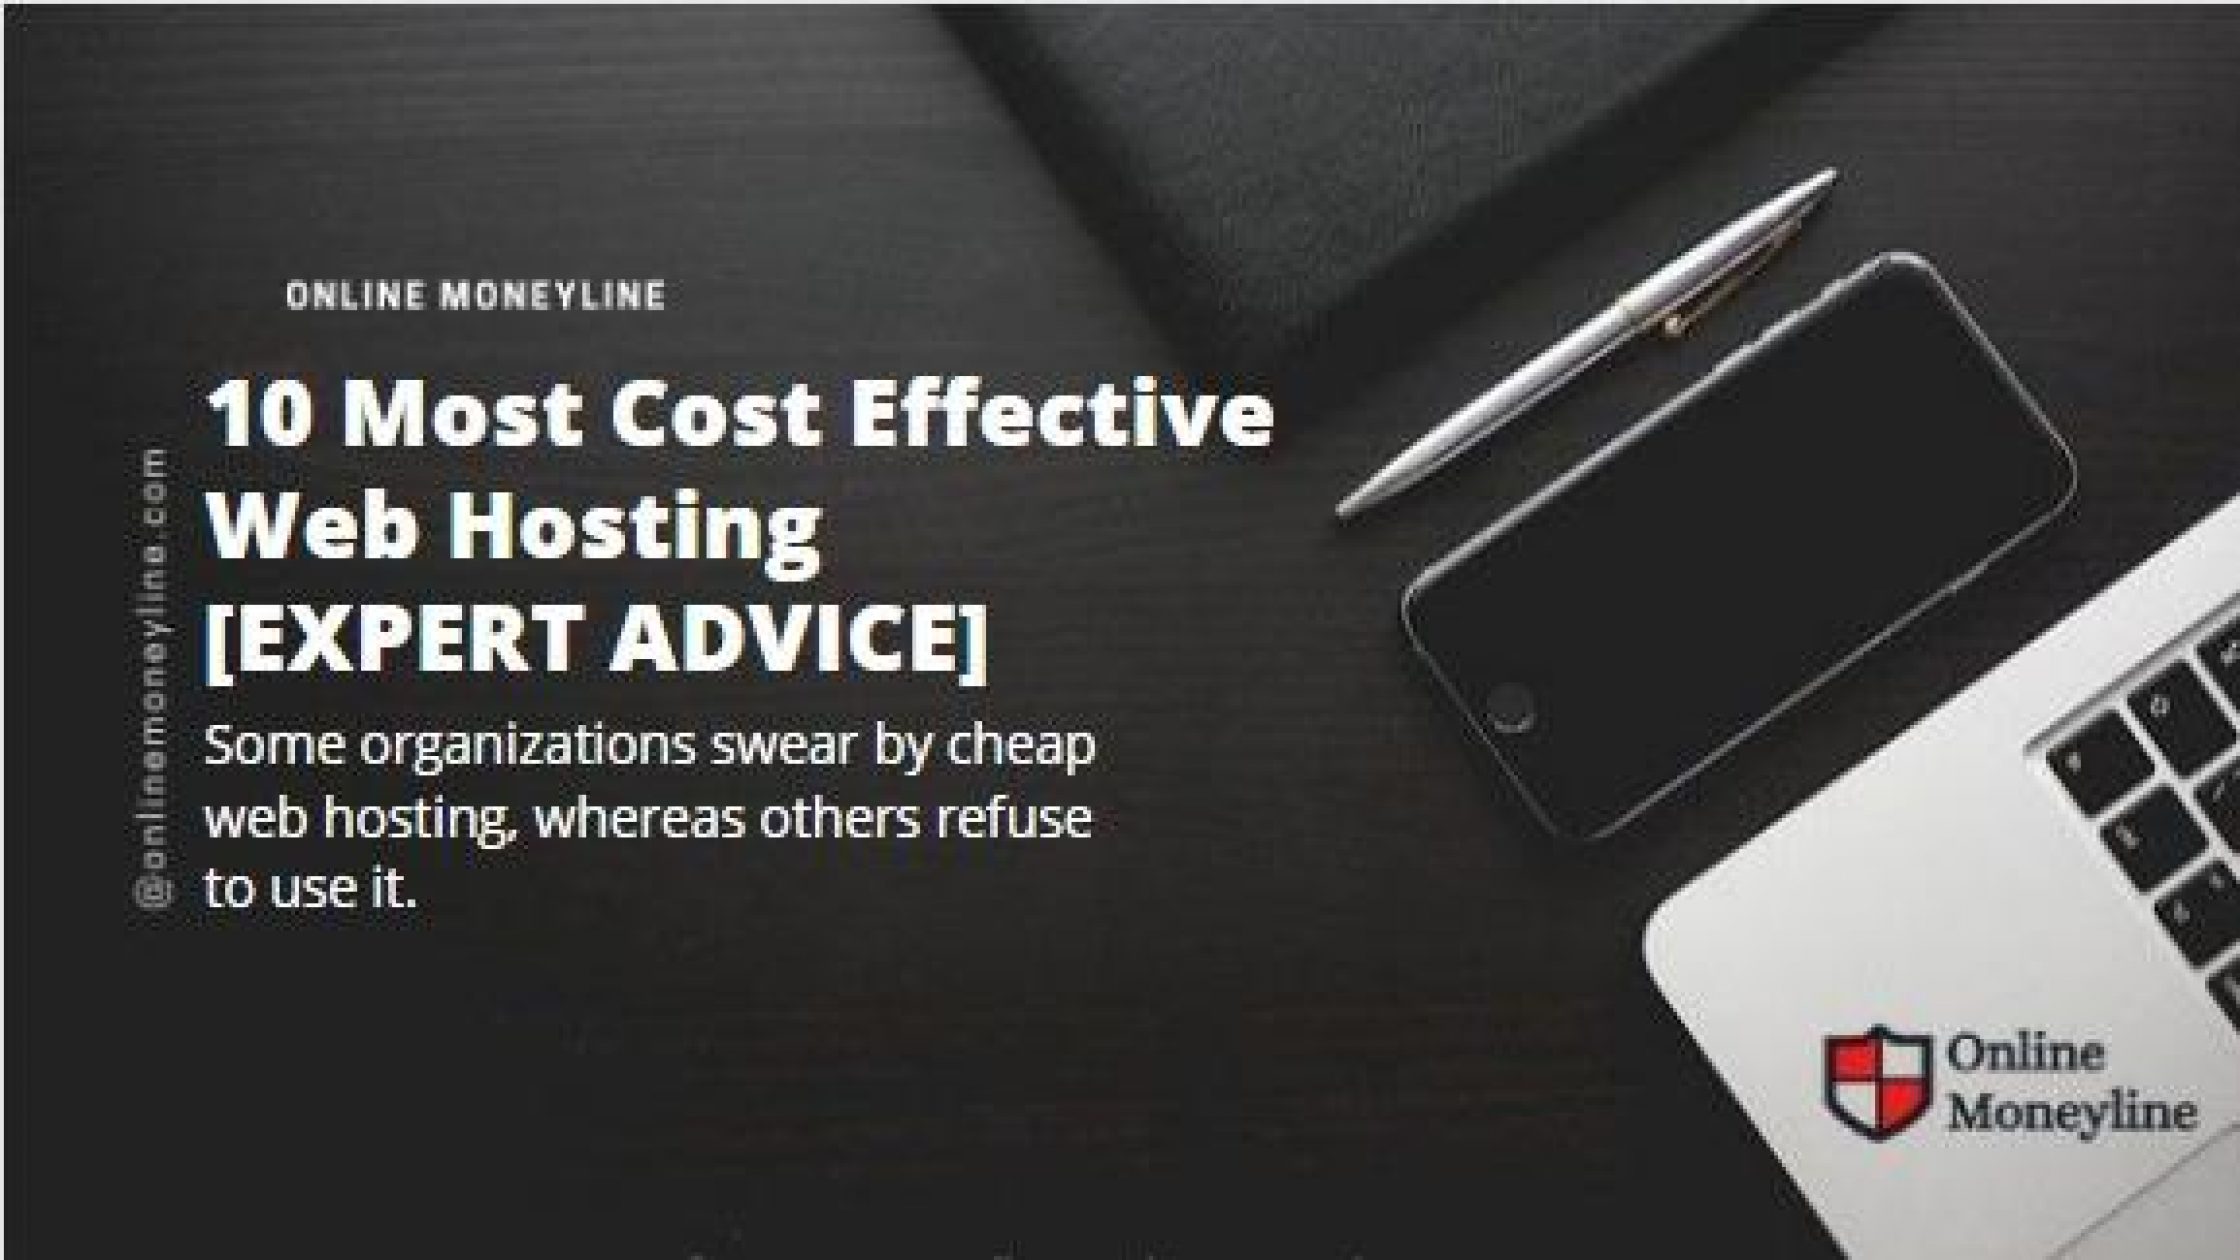 10 Most Cost Effective Web Hosting [EXPERT ADVICE]